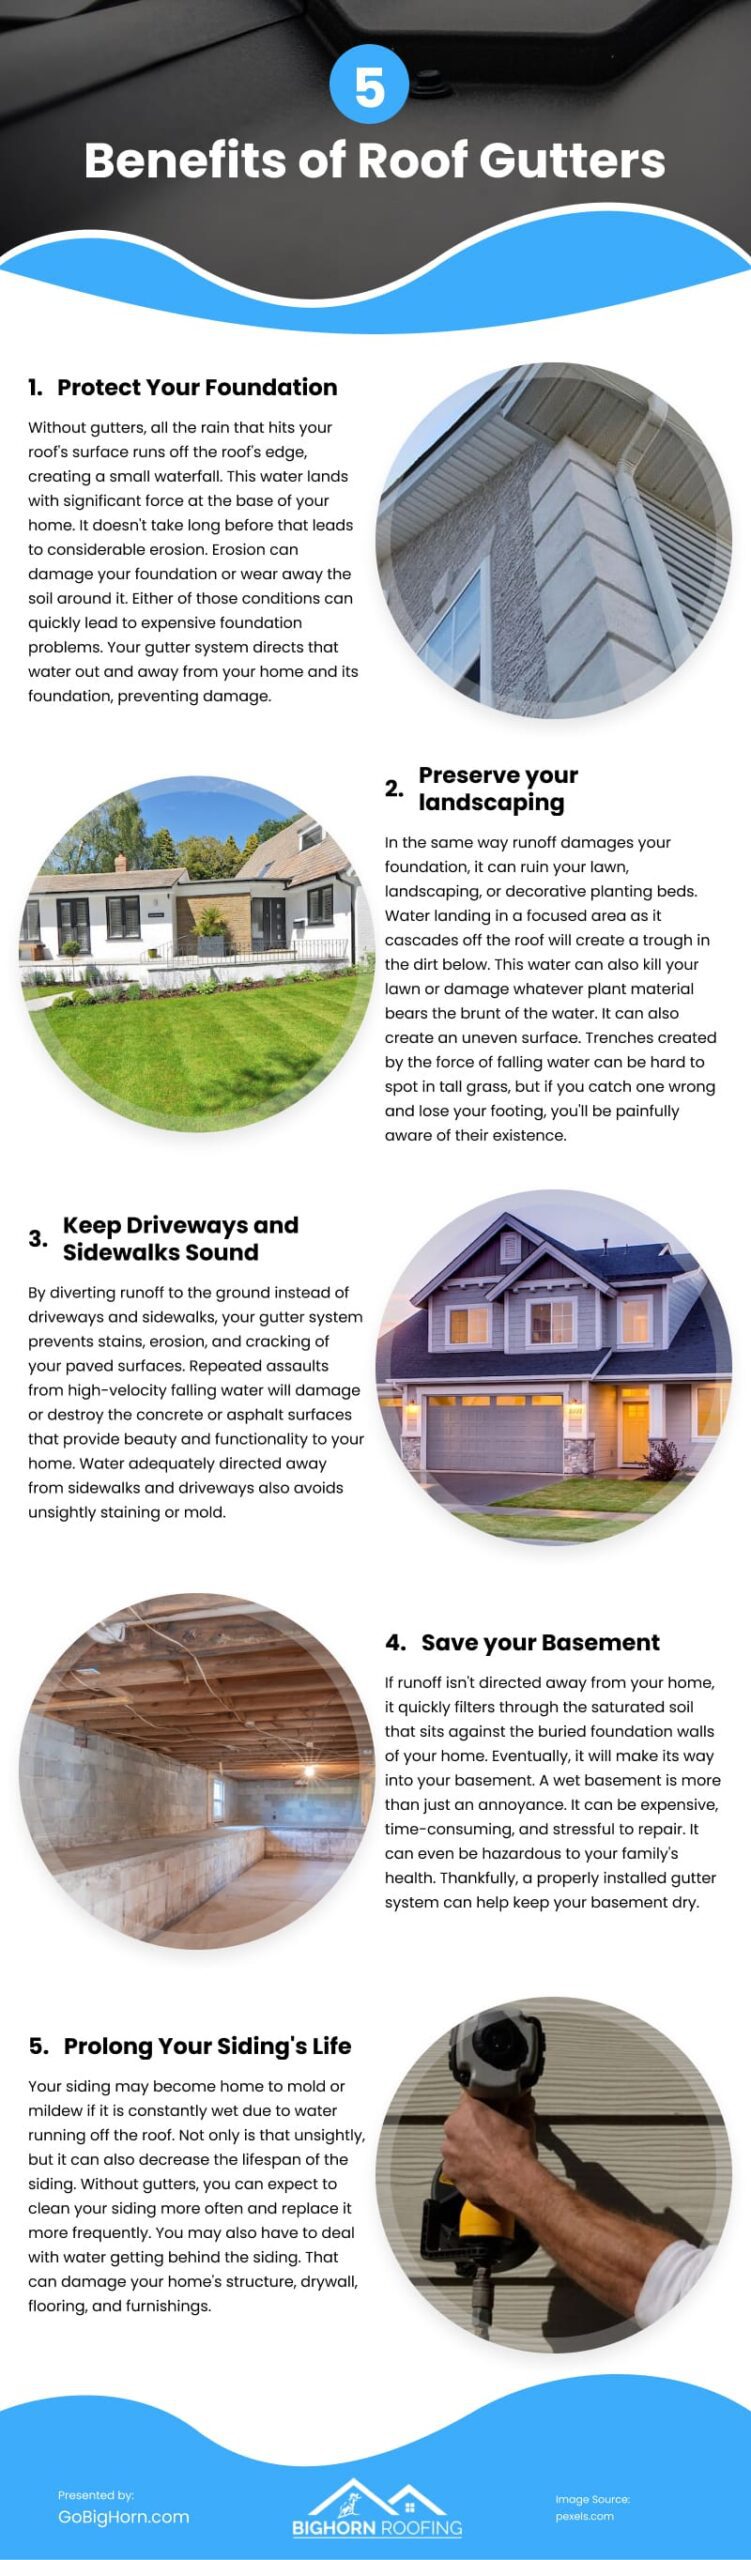 5 Benefits of Roof Gutters Infographic